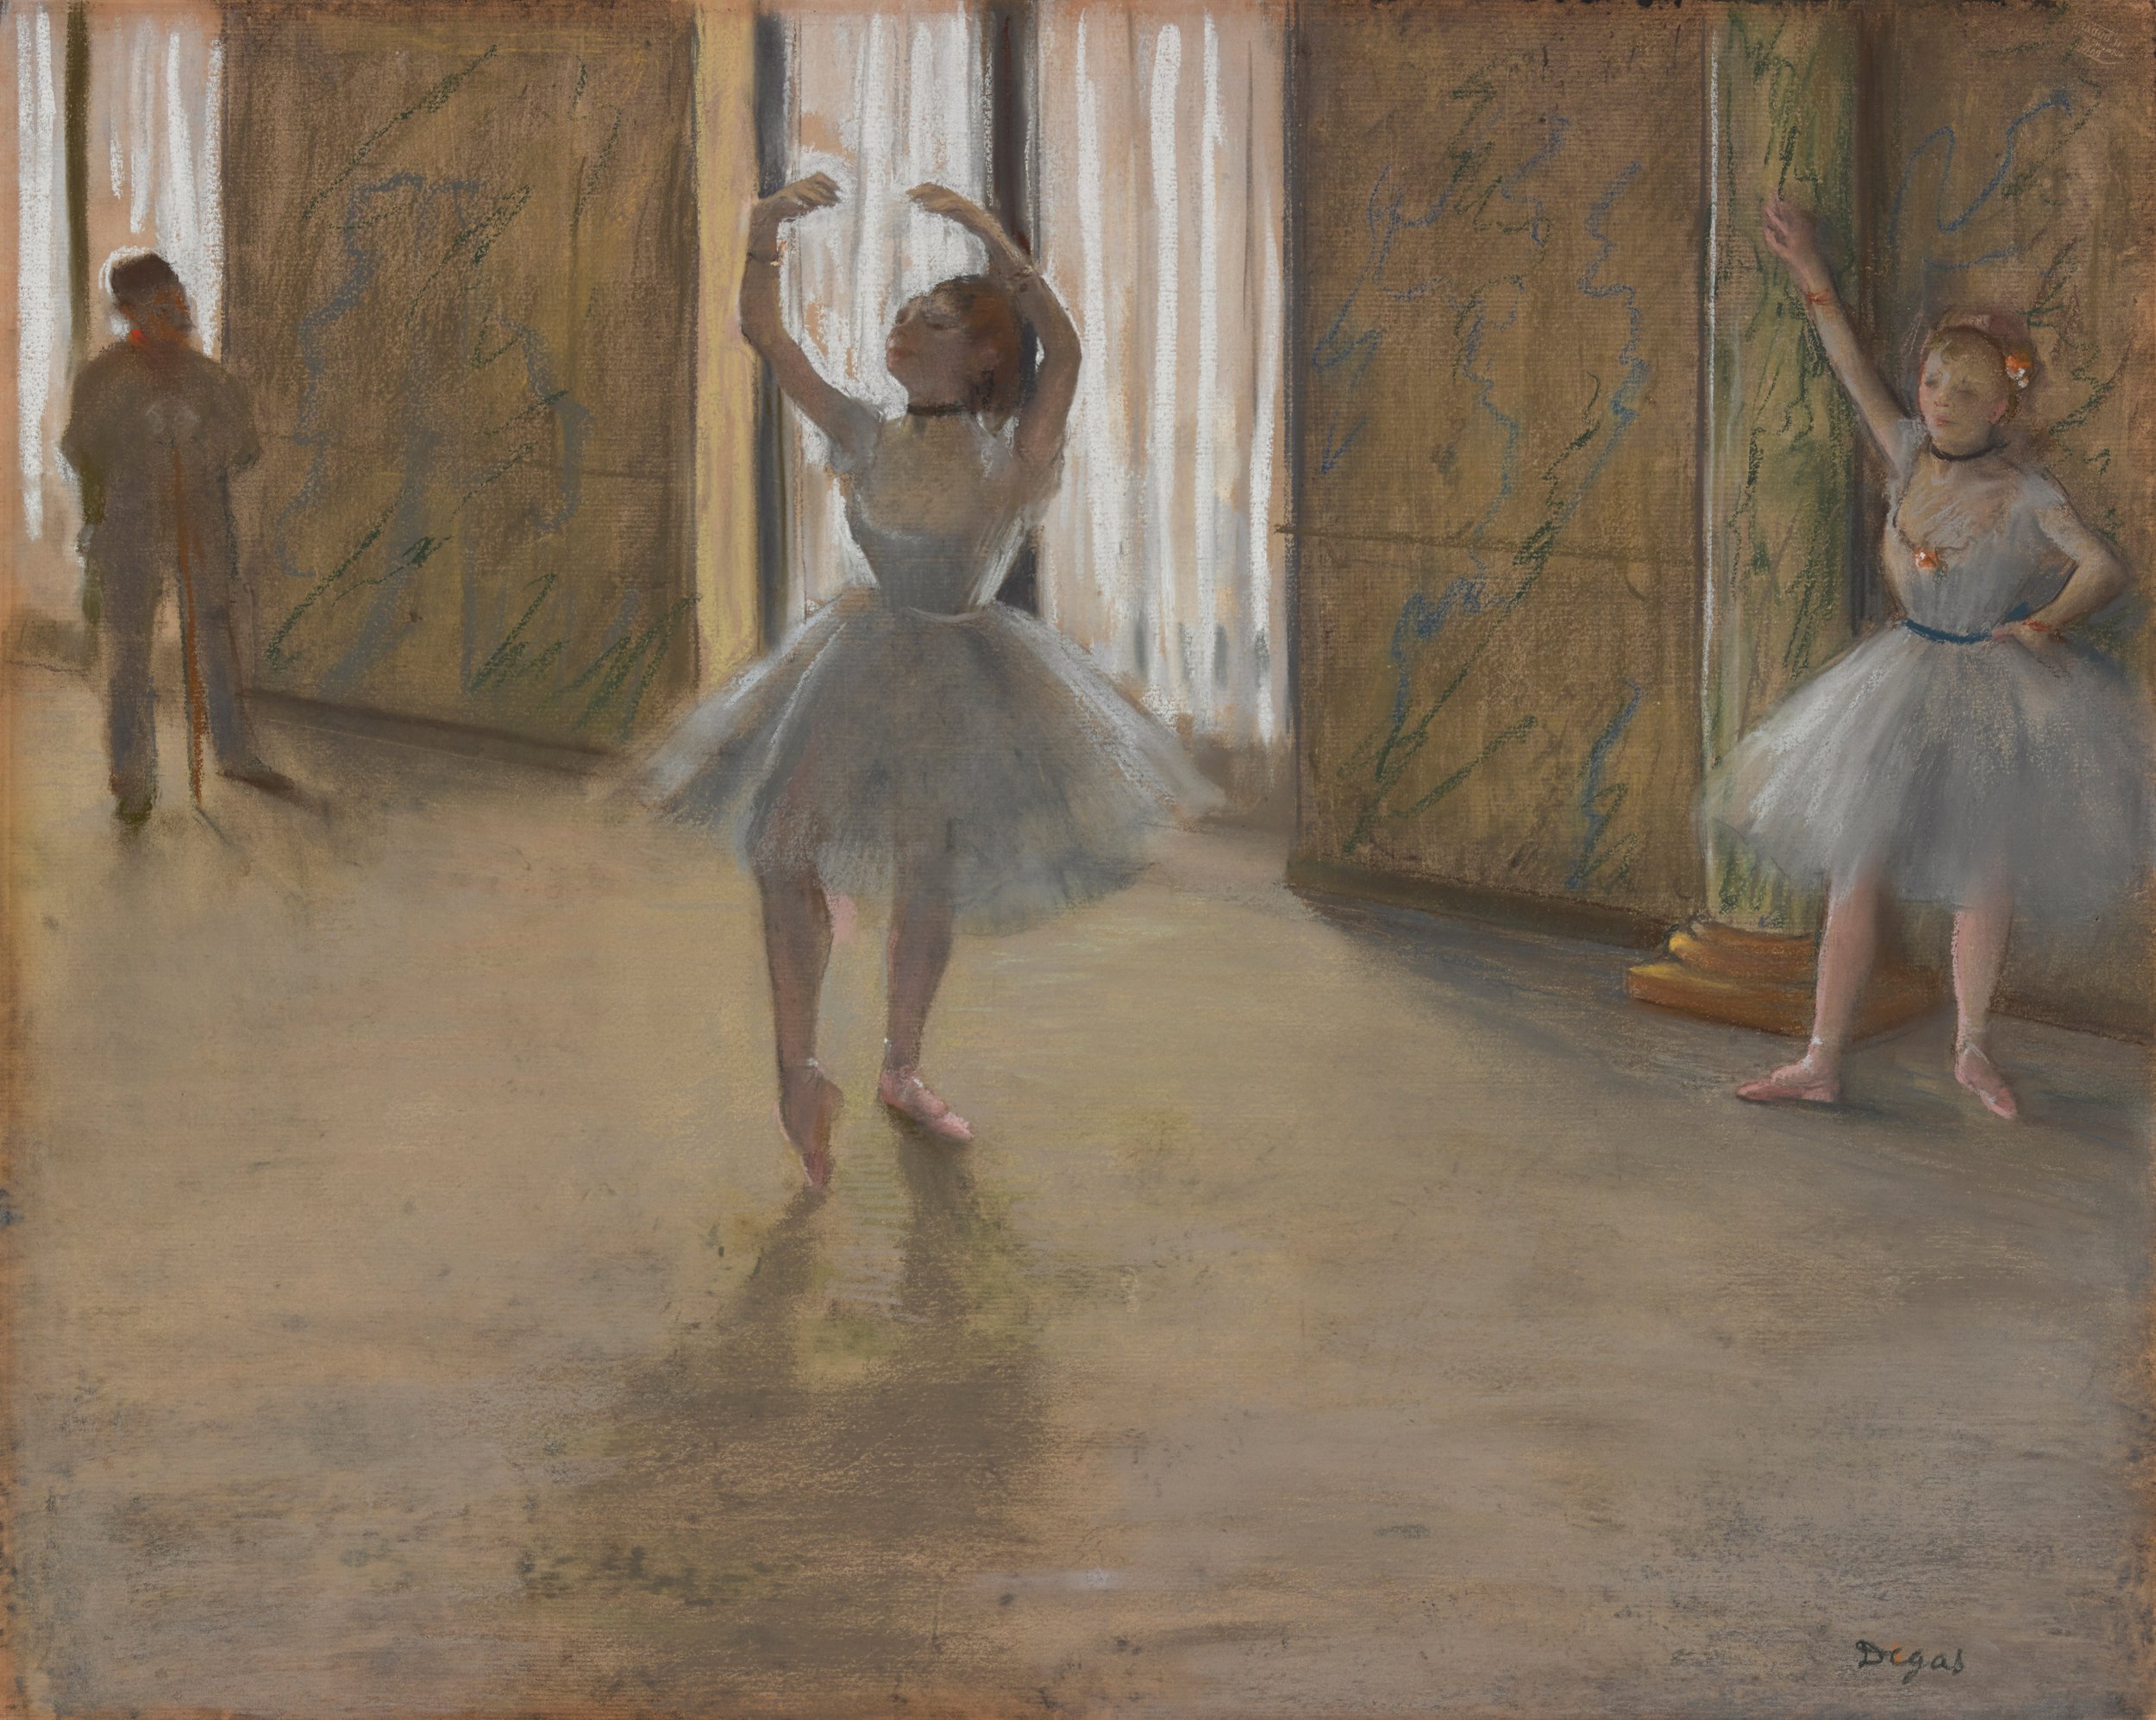   Hilaire-Germain-Edgar Degas  France, 1834–1917  The Dancing Lesson , circa 1877 pastel monoprint on paper, 23 x 28 5/8 inches The Joan Whitney Payson Collection at the Portland Museum of Art, Maine.  Gift of John Whitney Payson, 1991.86 